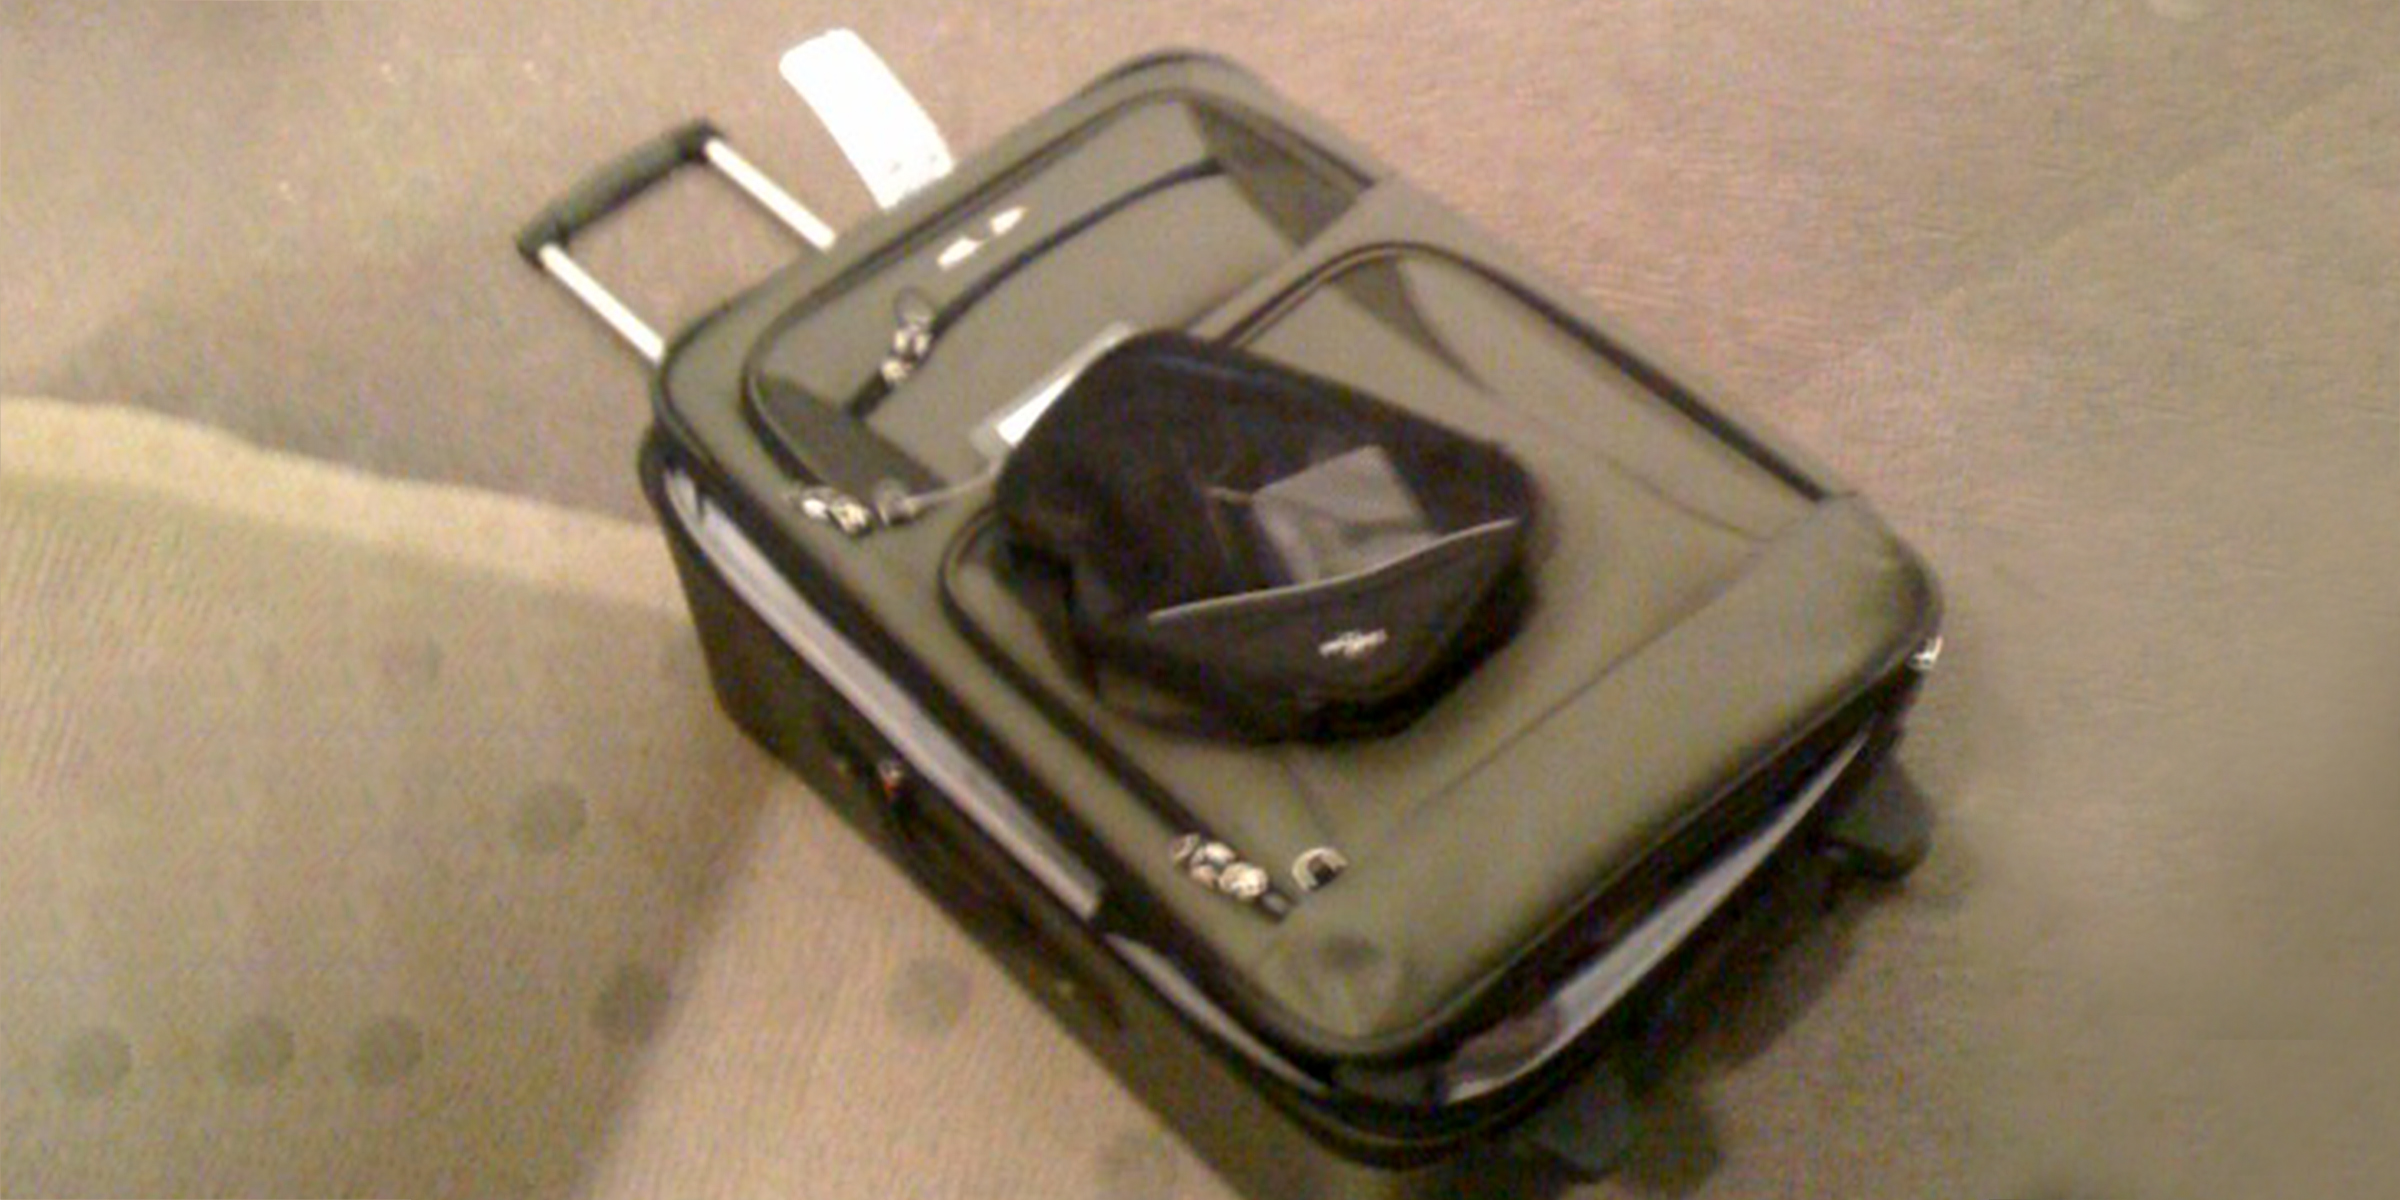 A suitcase | Source: Flickr